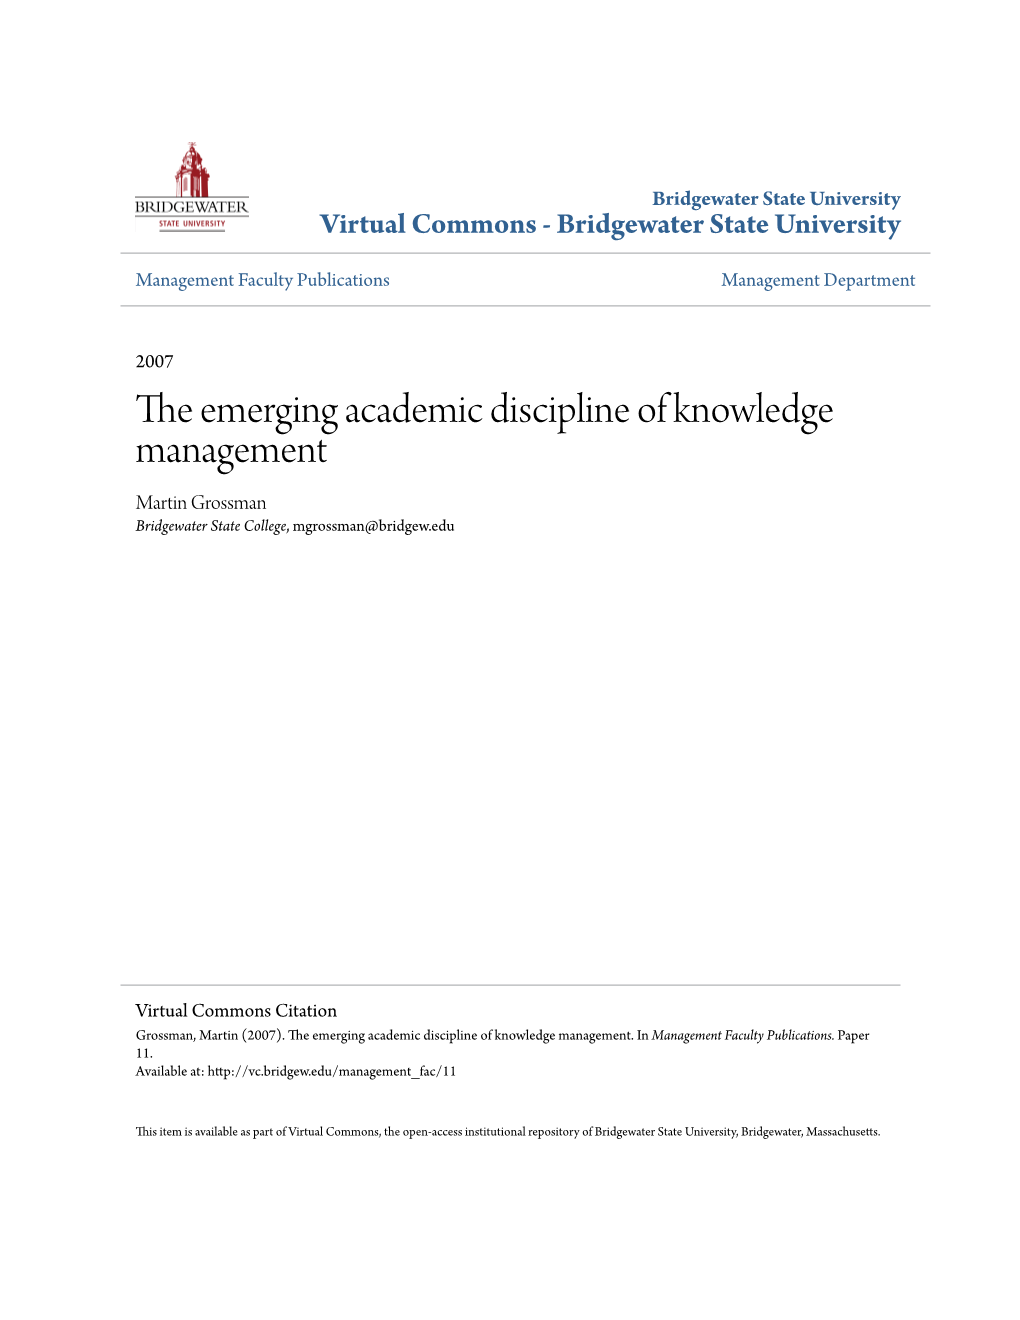 The Emerging Academic Discipline of Knowledge Management